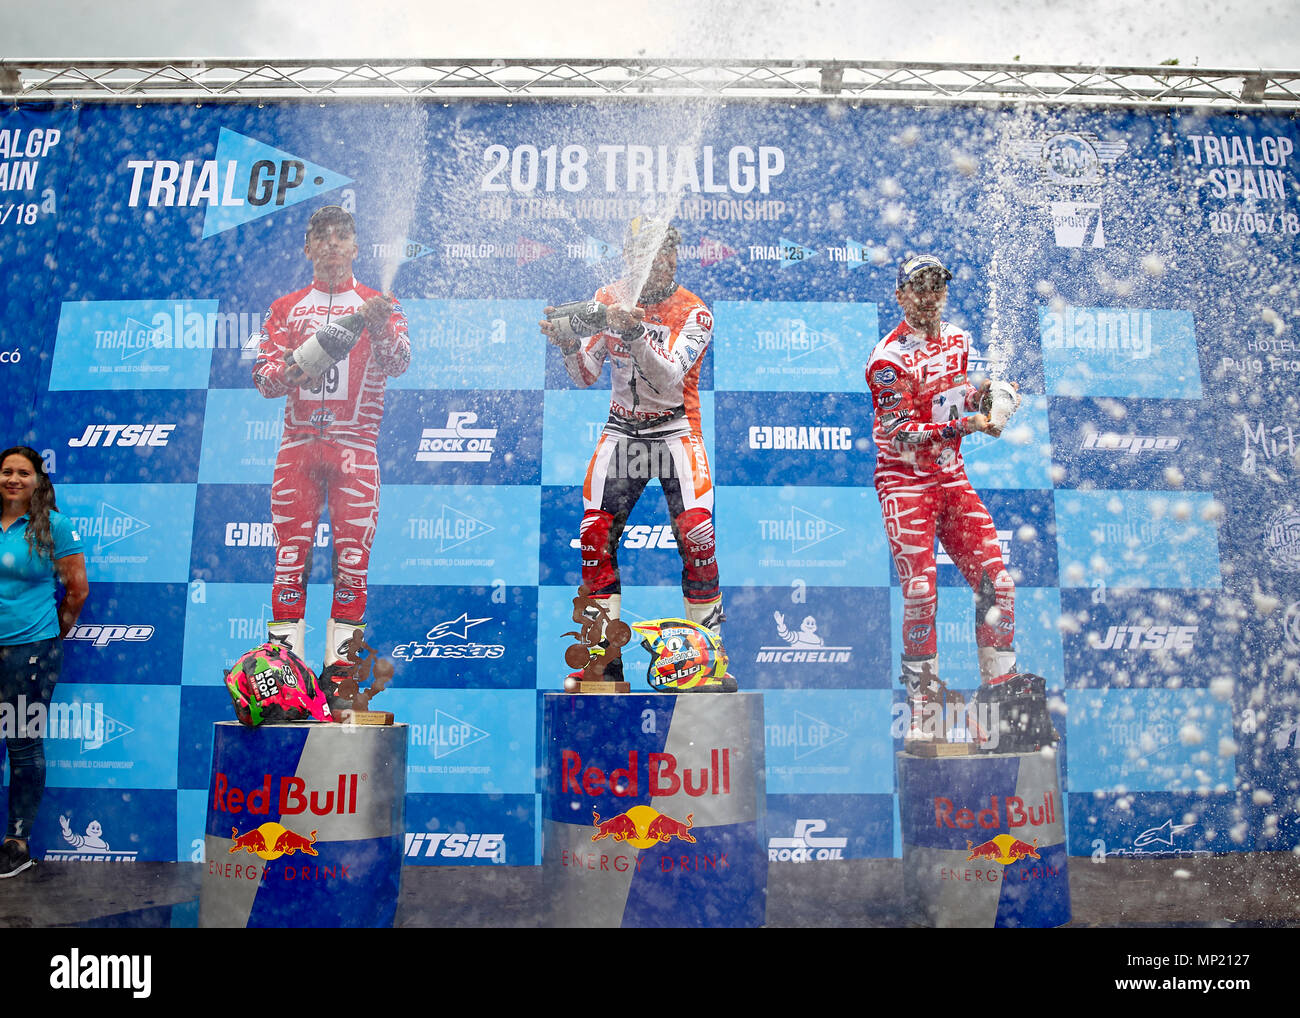 Camprodon, Girona, Spain. 20th May, 2018. FIM Trial World Championships, Spain; (L-R) Jaime Busto of the TrialGP class (2nd place), Toni Bou of the TrialGP class (1st place), and Jeroni Fajardo of the TrialGP class (3rd place) celebrate at the podium Credit: Action Plus Sports/Alamy Live News Stock Photo